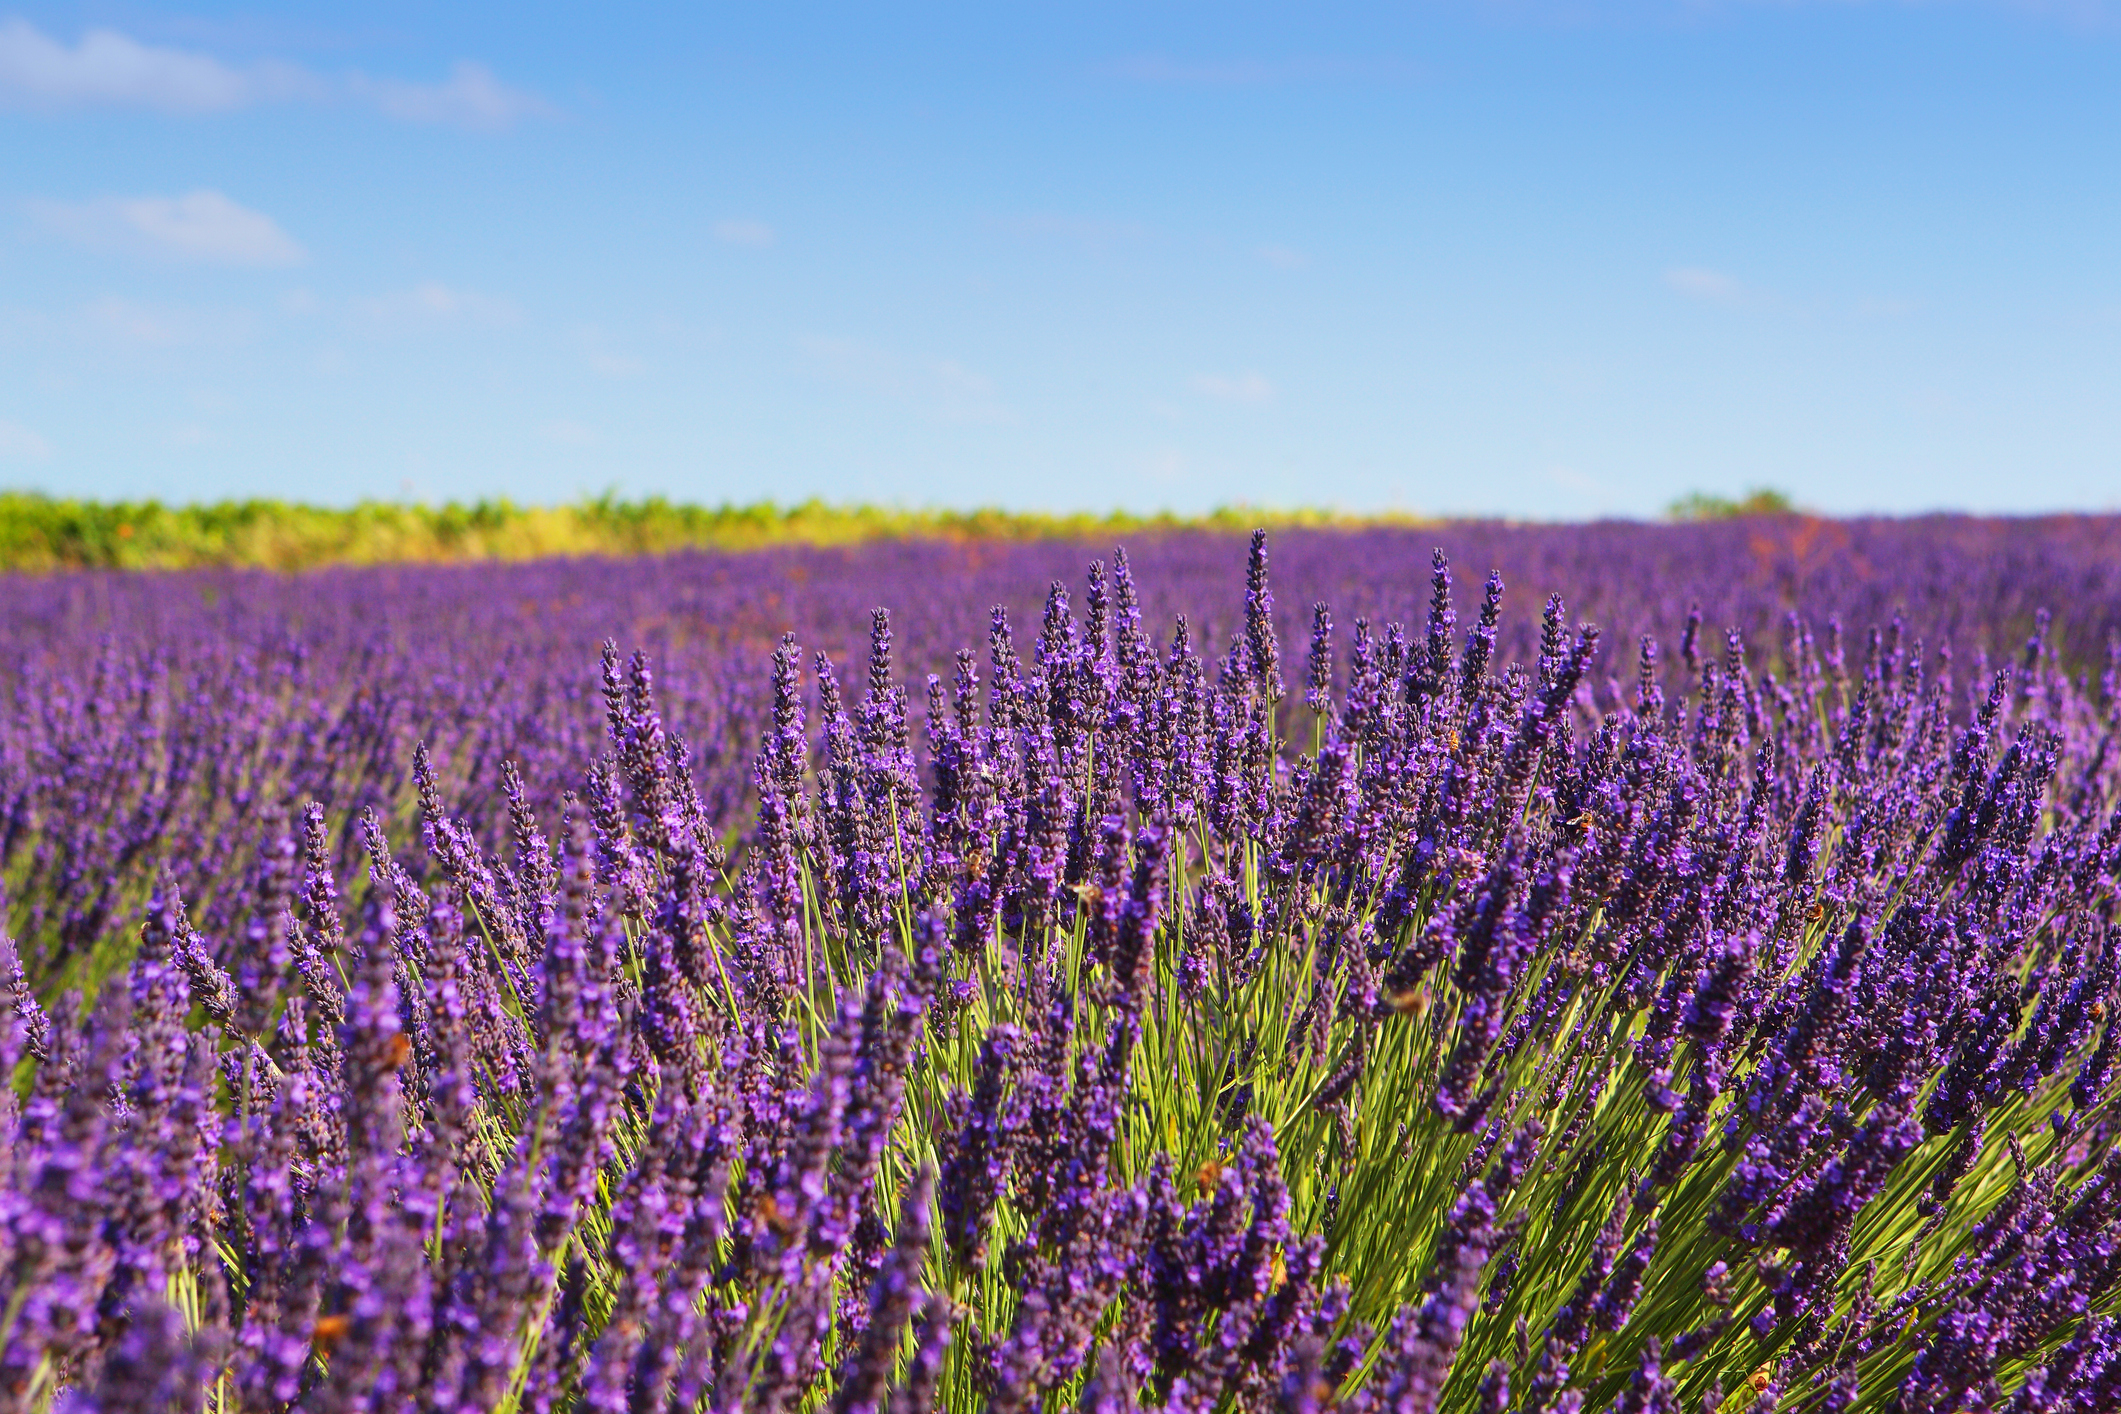 A vast field of blooming lavender is shown under a clear sky, showcasing a picturesque and tranquil travel destination